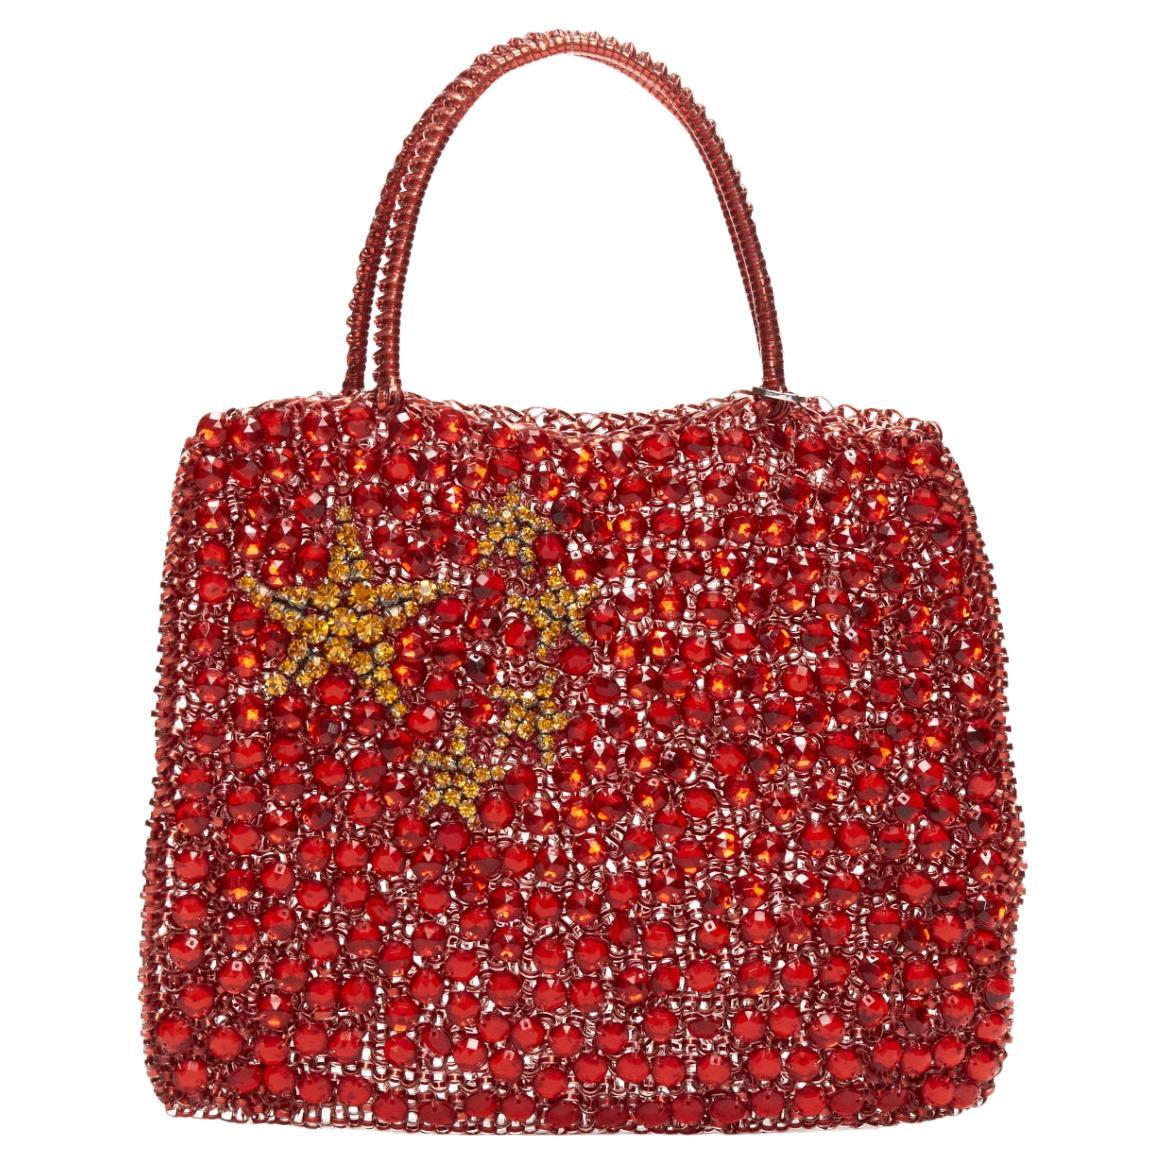 rare ANTEPRIMA Wire Bag Olympics China Flag red gold crystals tote